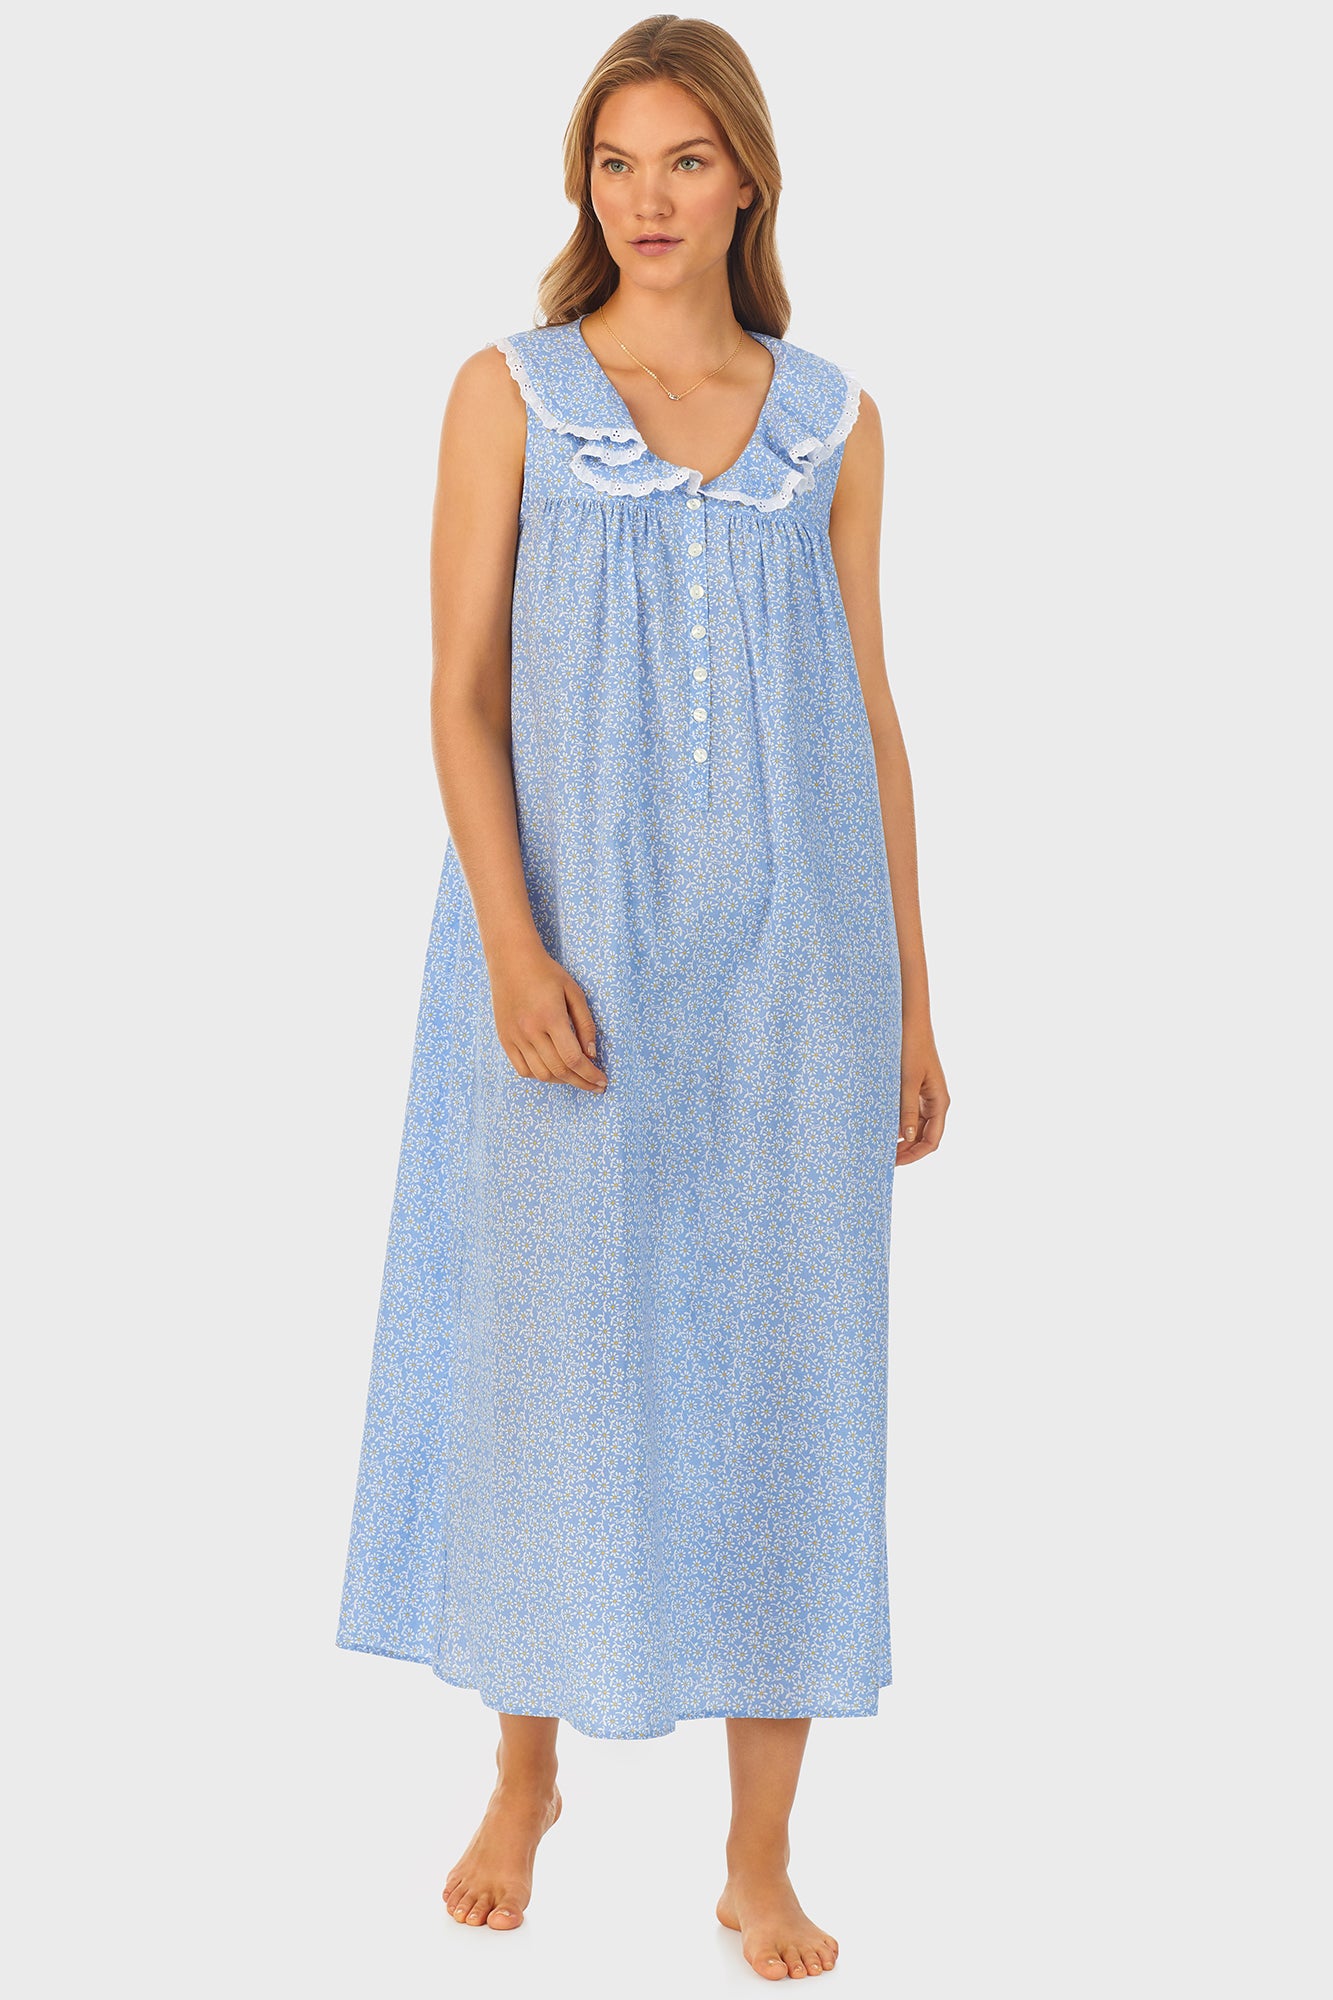  A lady wearing blue long nightgown with a white pattern.